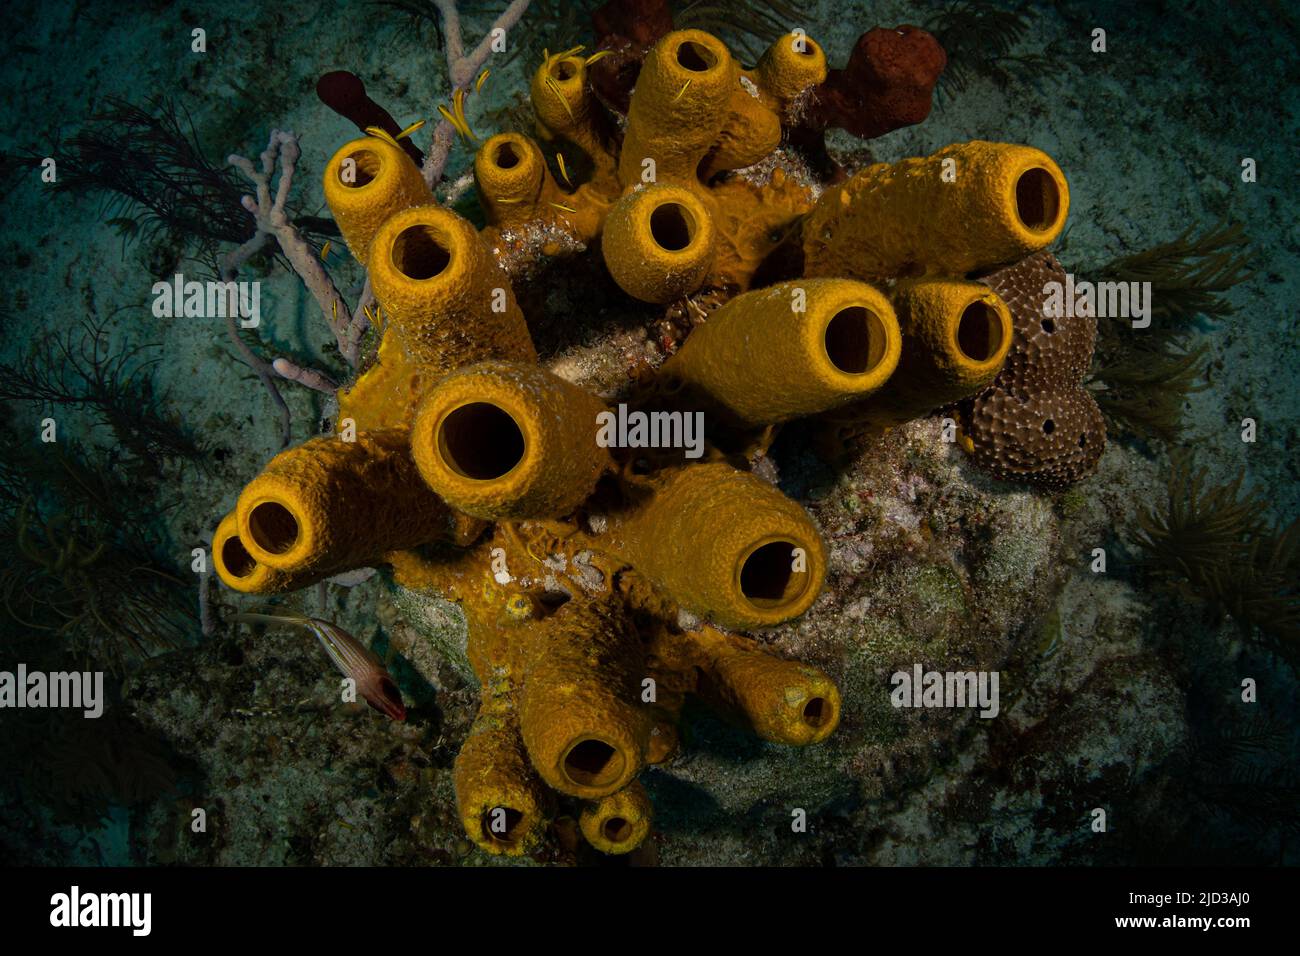 Branching tube sponge (Pseudoceratina crassa) at dawn on the G-Spot divesite off the island of French Cay, Turks and Caicos Islands Stock Photo